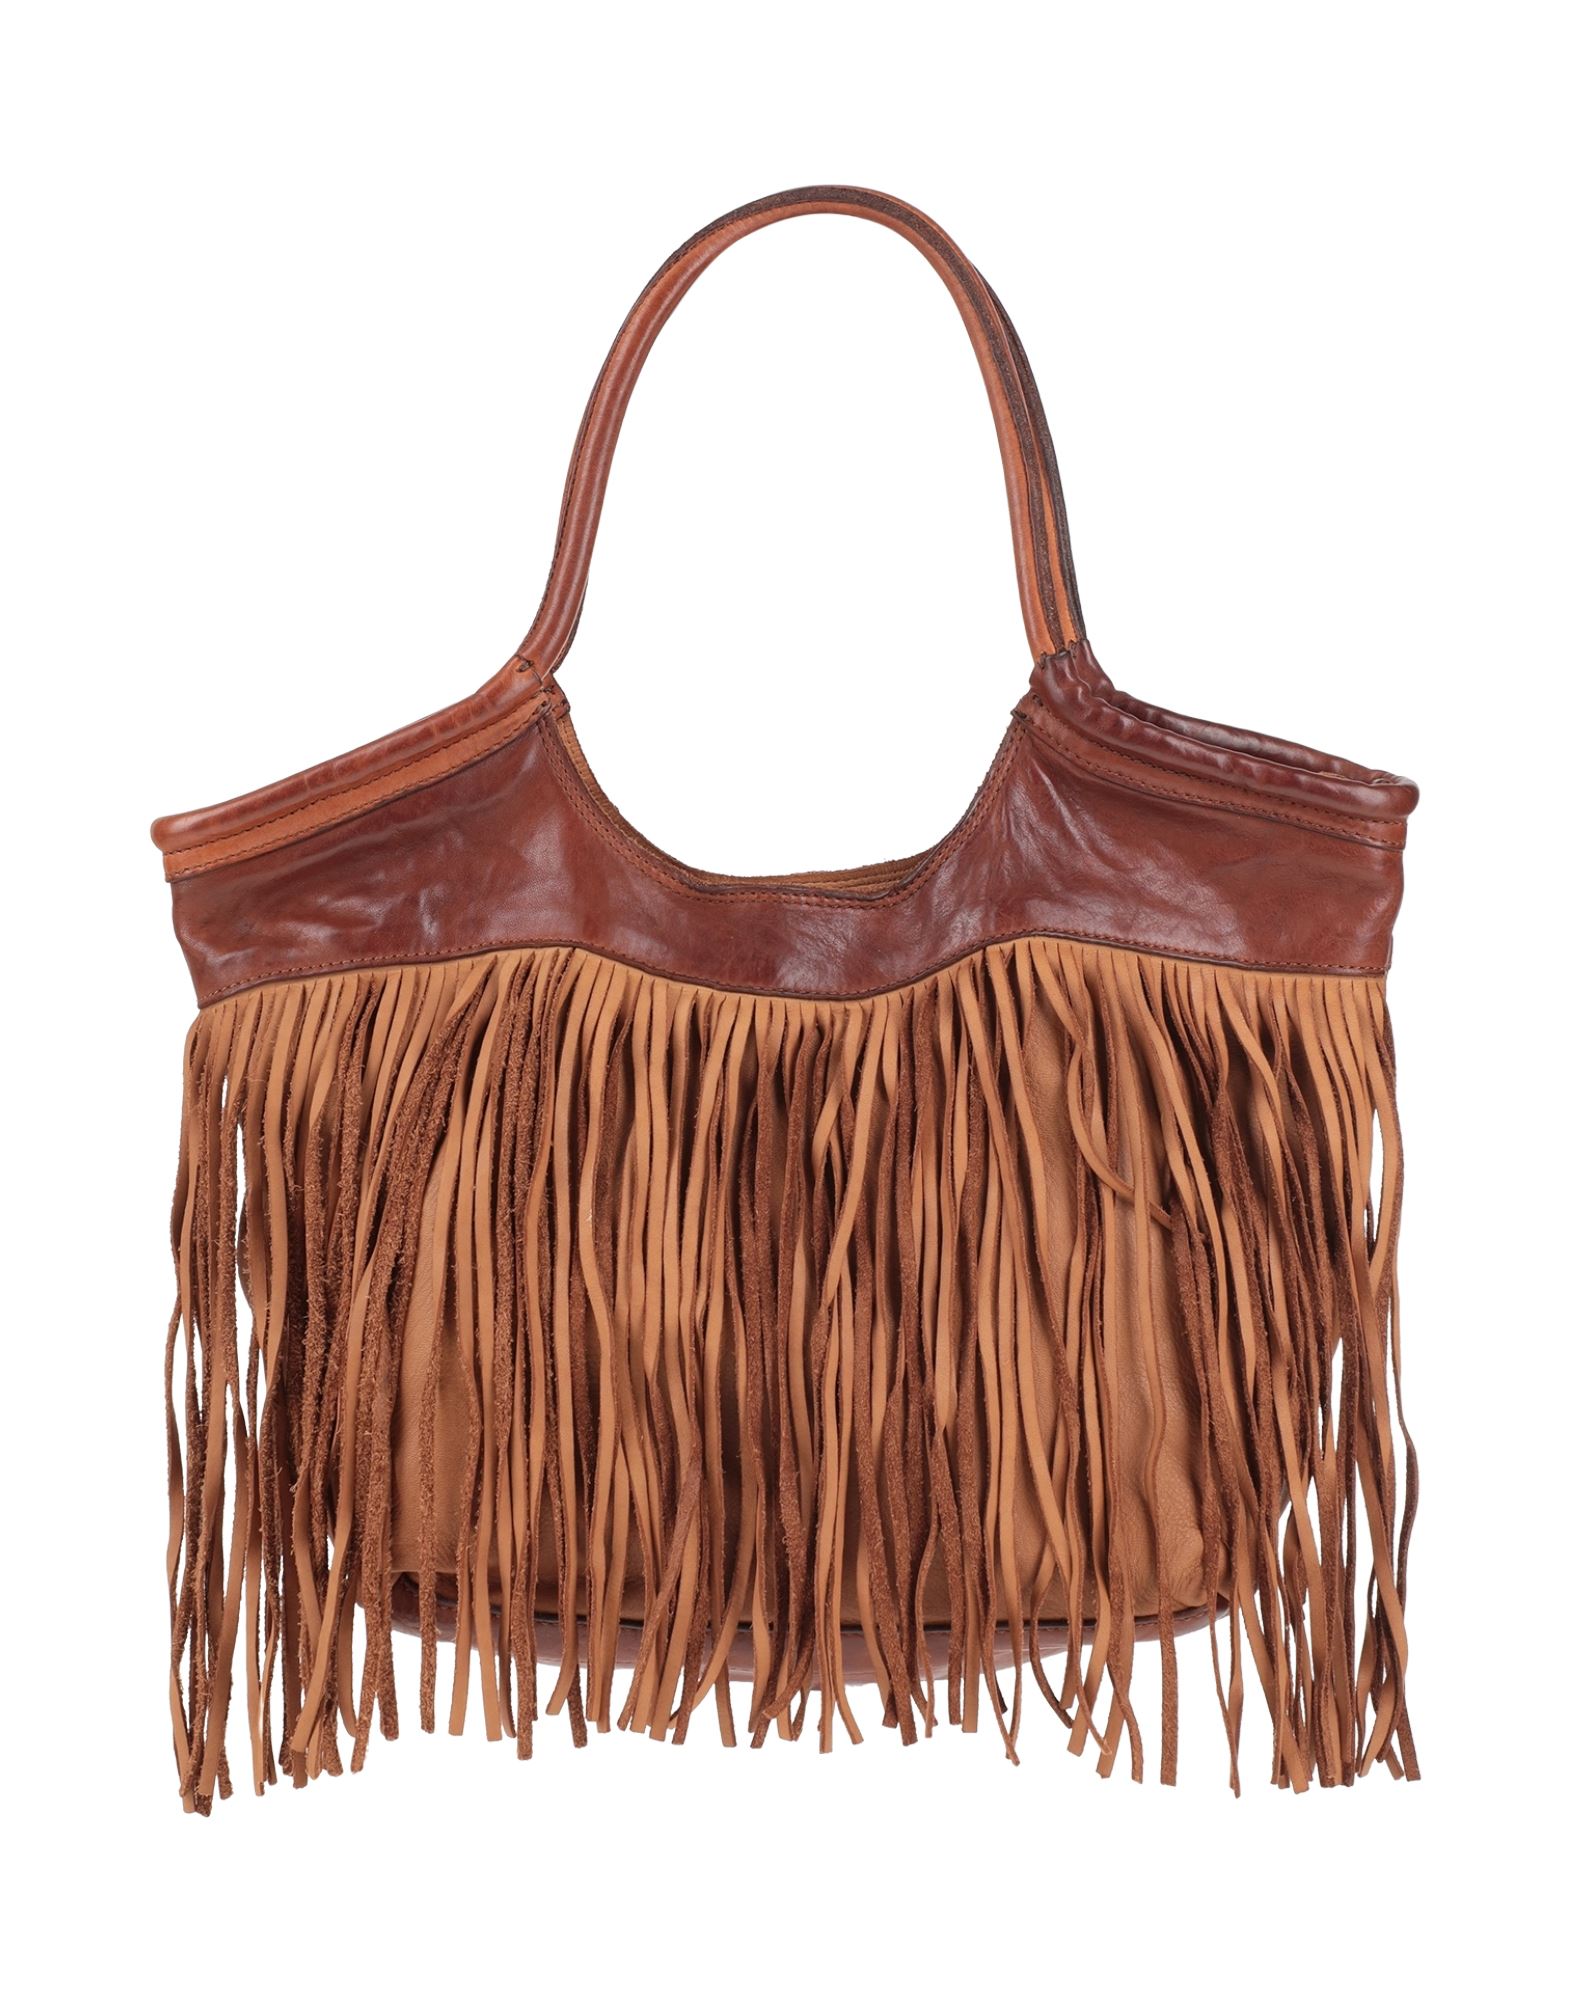 Caterina Lucchi Handbags In Brown